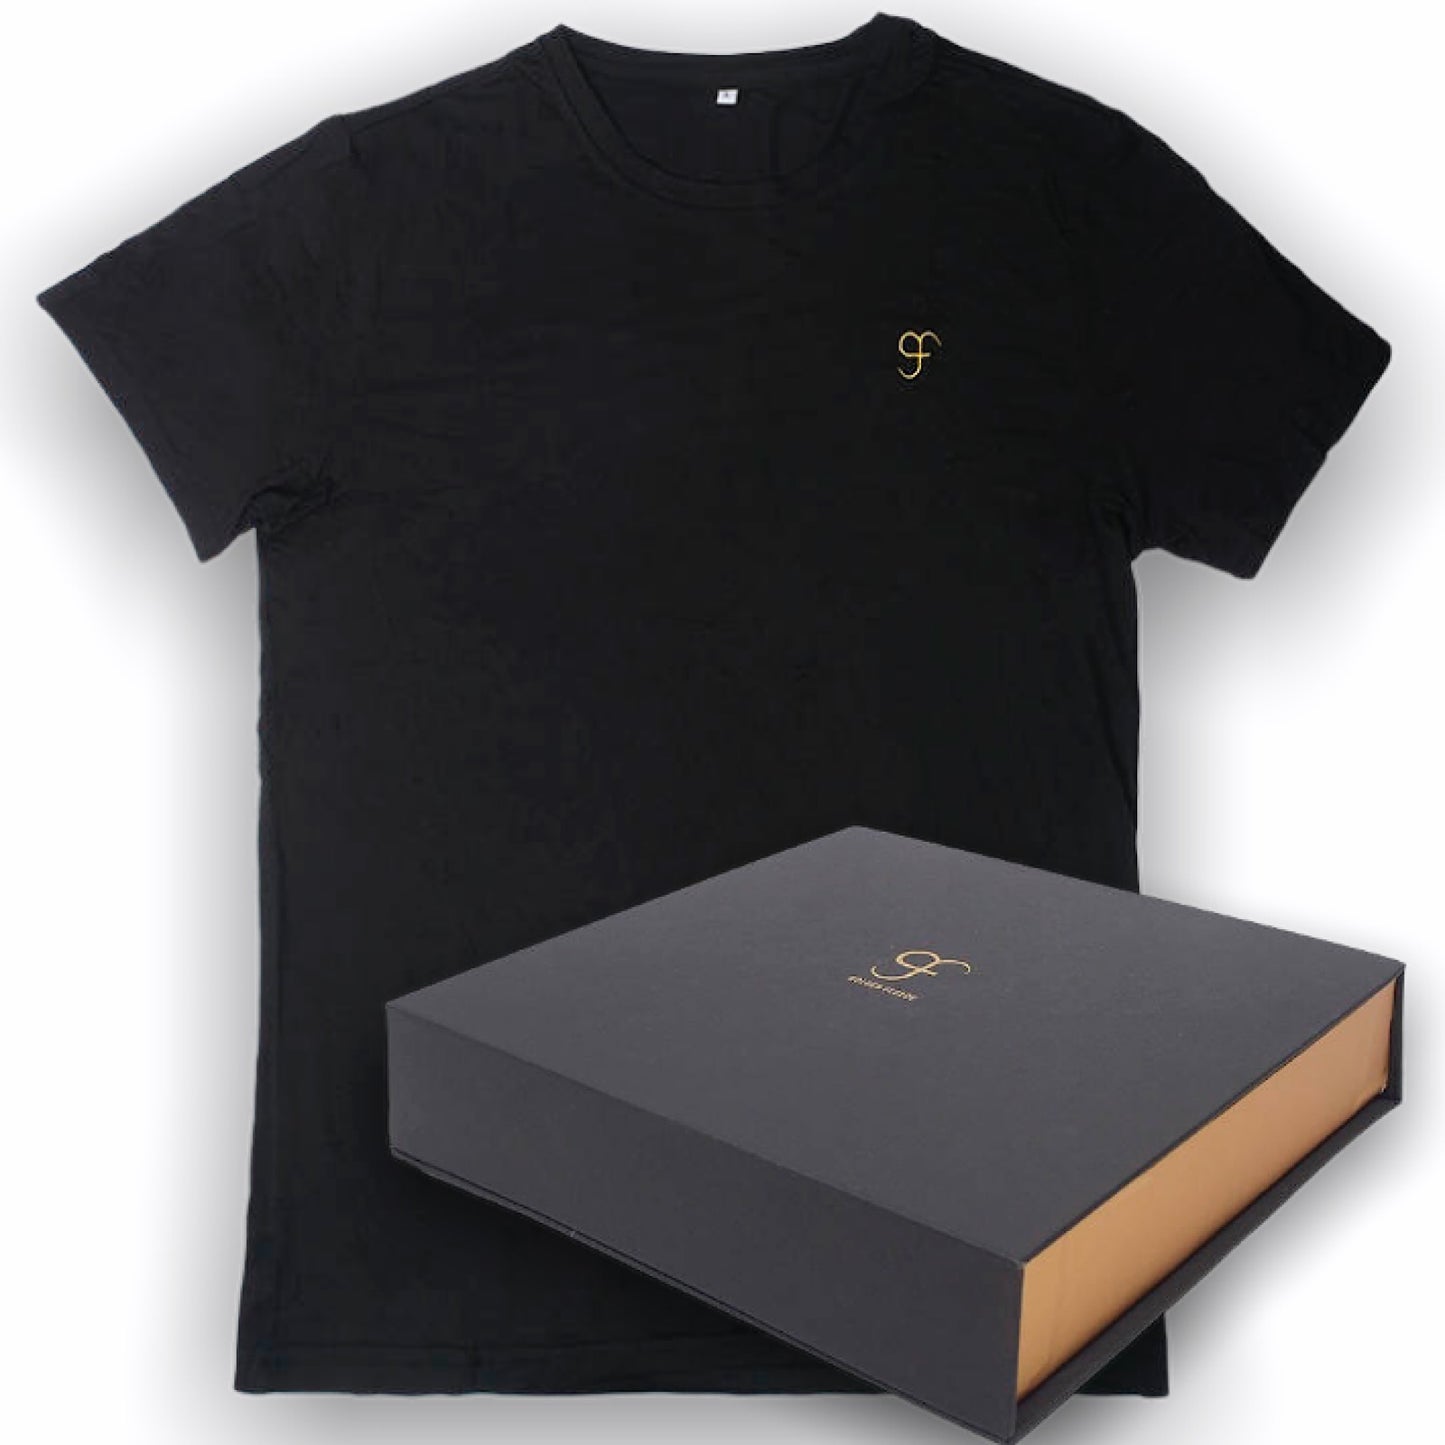 Small size Luxury Bamboo T-Shirt & Bamboo Socks Gift Box Set for Men & Women in a Handcrafted Magnetic Close Keepsake Box Black